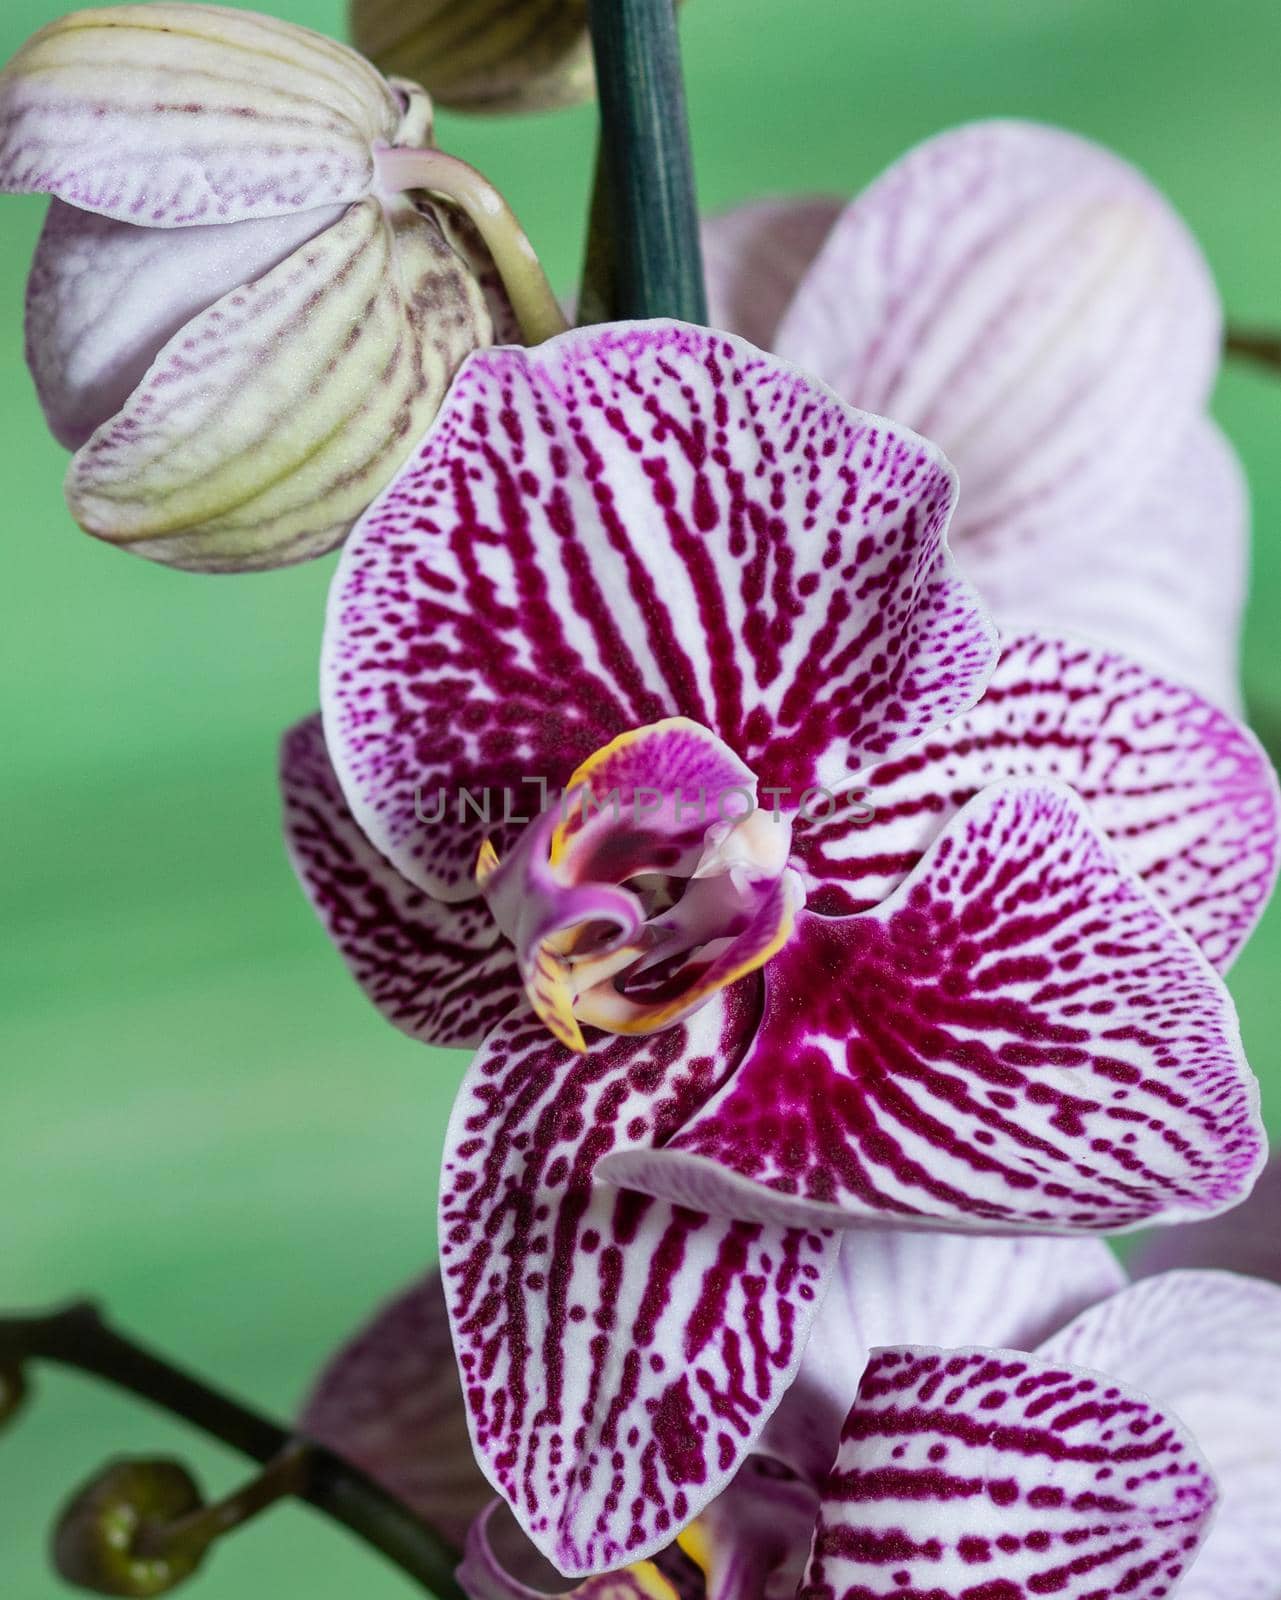 Beautiful colorful orchid close up